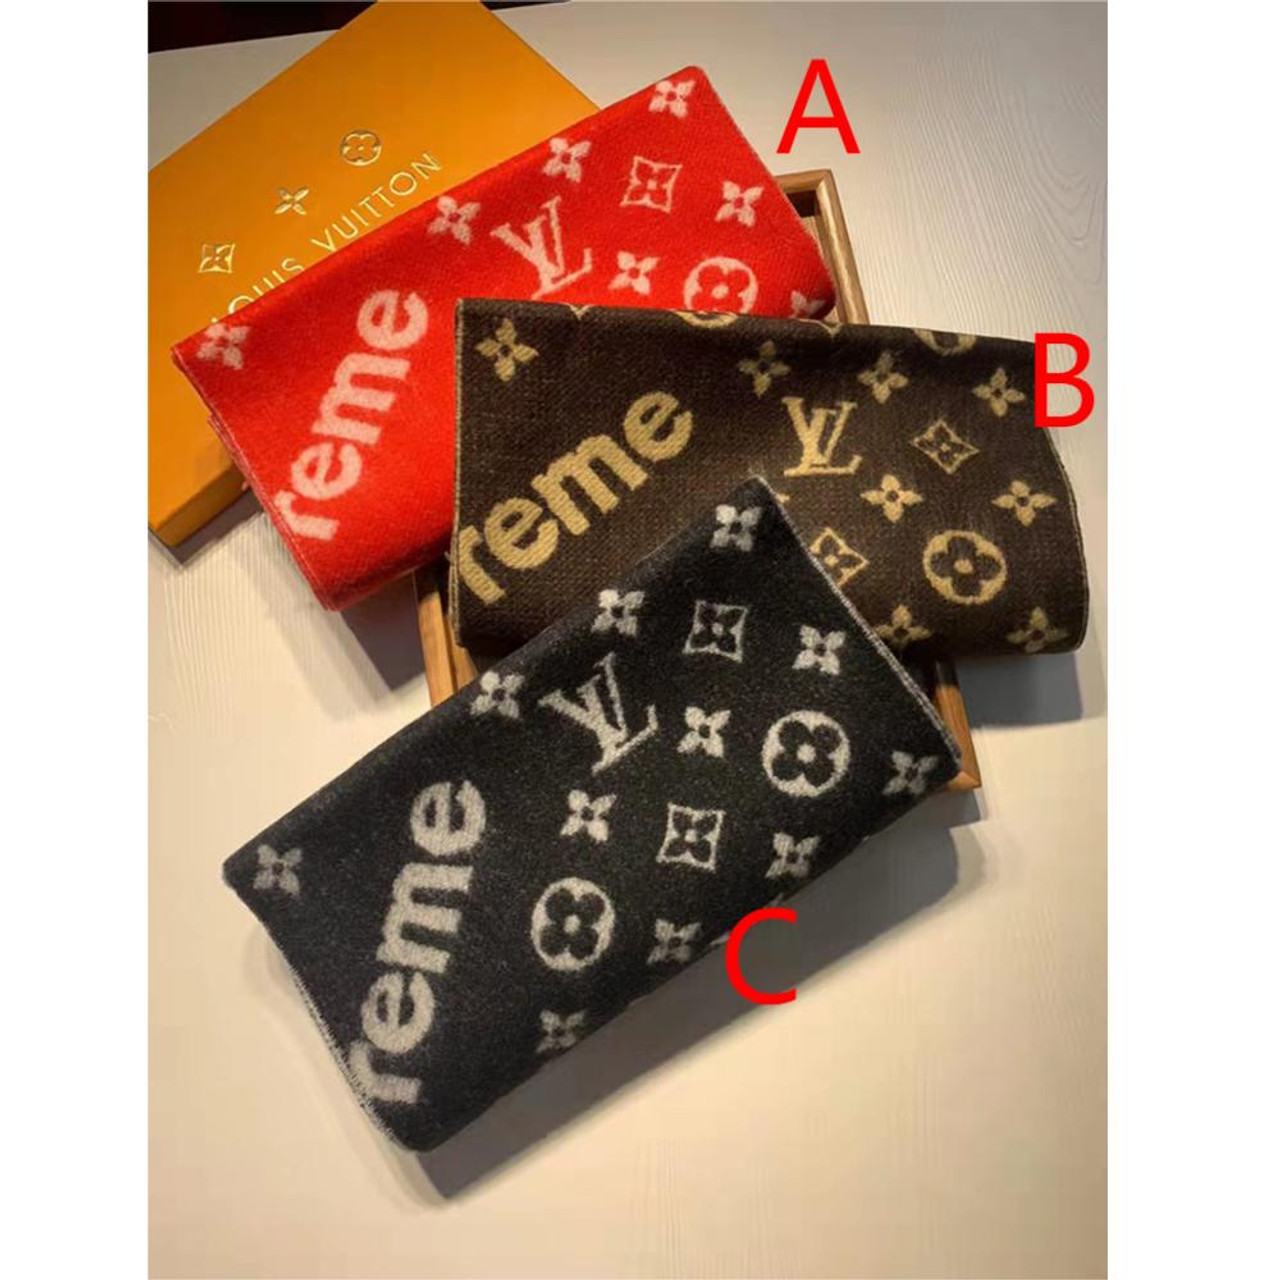 LOUIS VUITTON Bandana / Supreme Scarf MP 1888｜Product  Code：2104101588042｜BRAND OFF Online Store